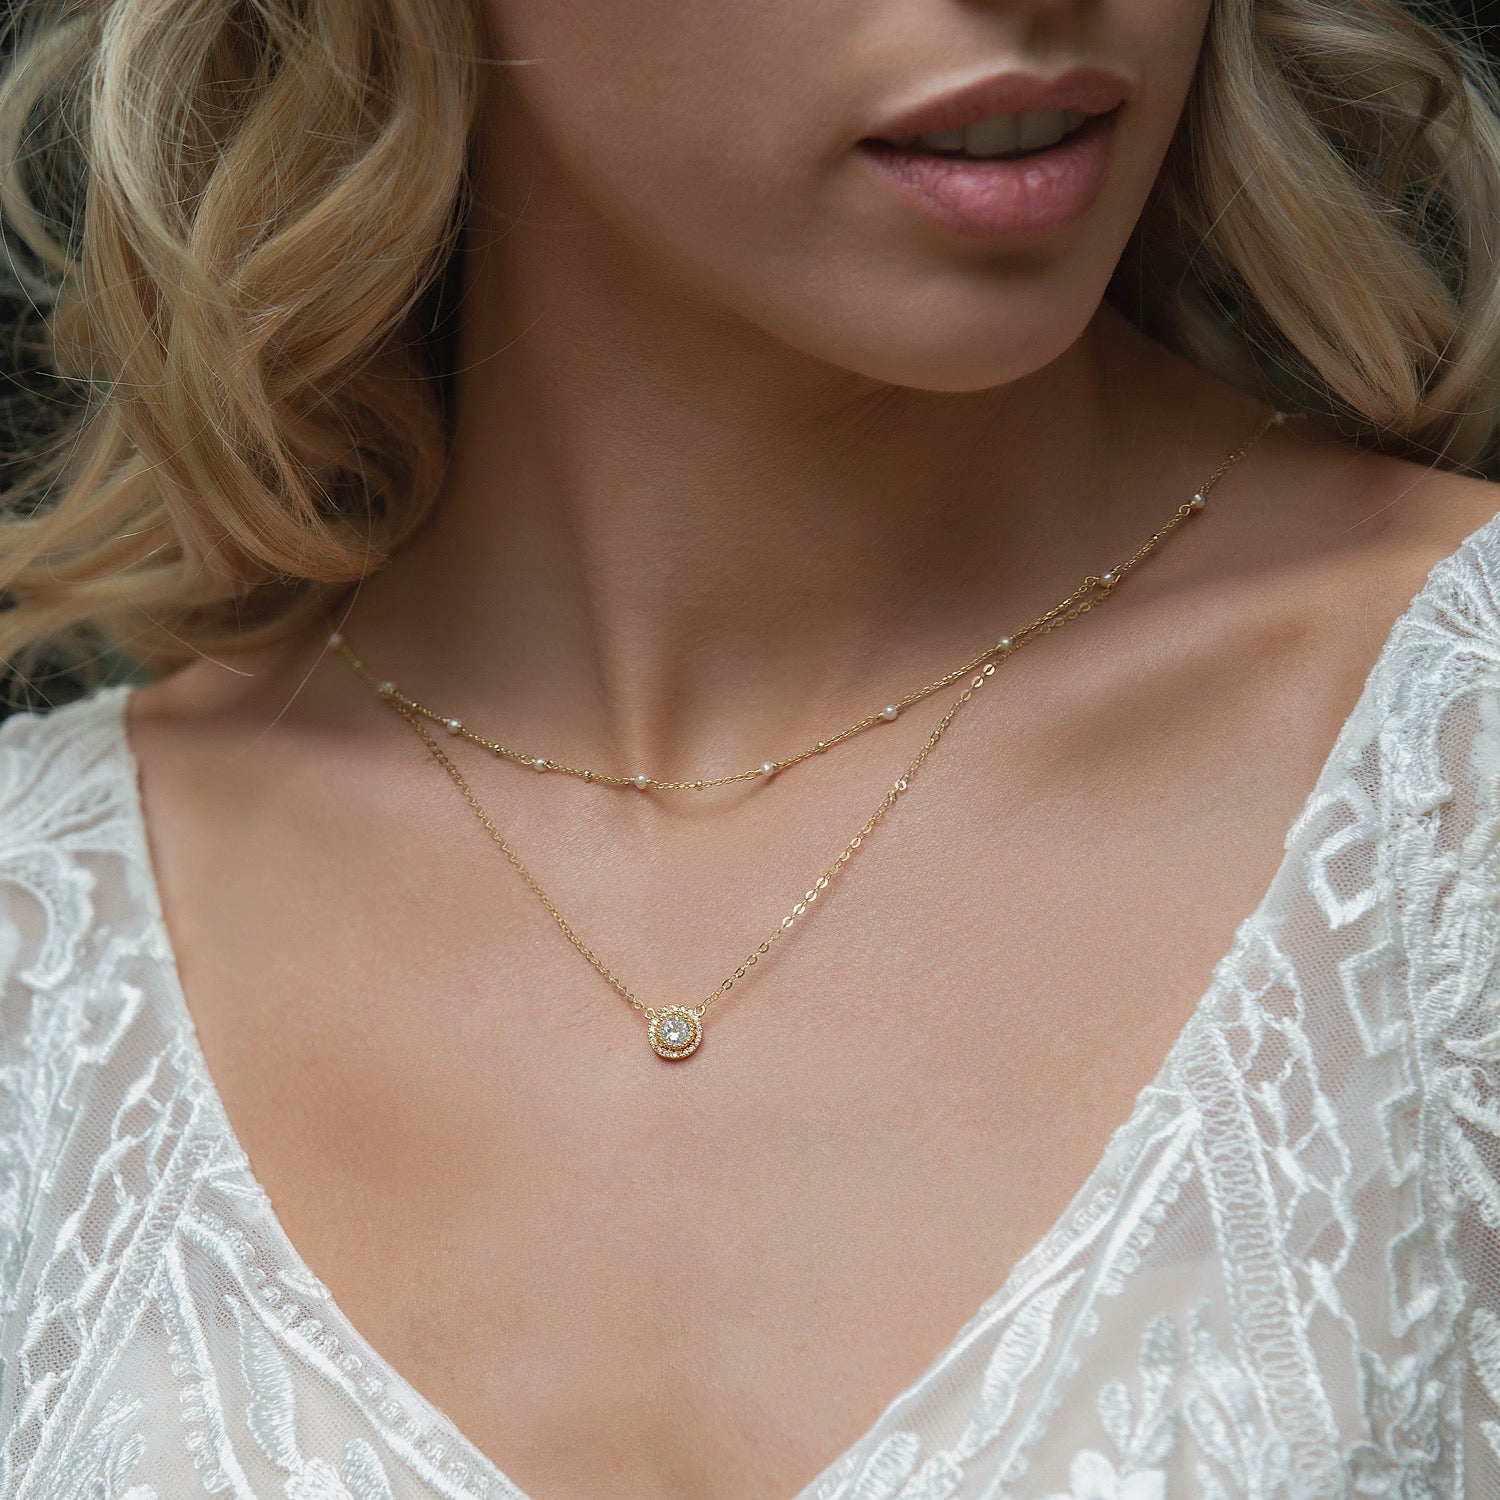 Buy Pearl Back Necklace, Sliding Back Chain, Lariat Back Pendant, Fine  Backdrop Chain, Rose Gold Necklace, Wedding Dress Jewel, Gift for Bride  Online in India - Etsy